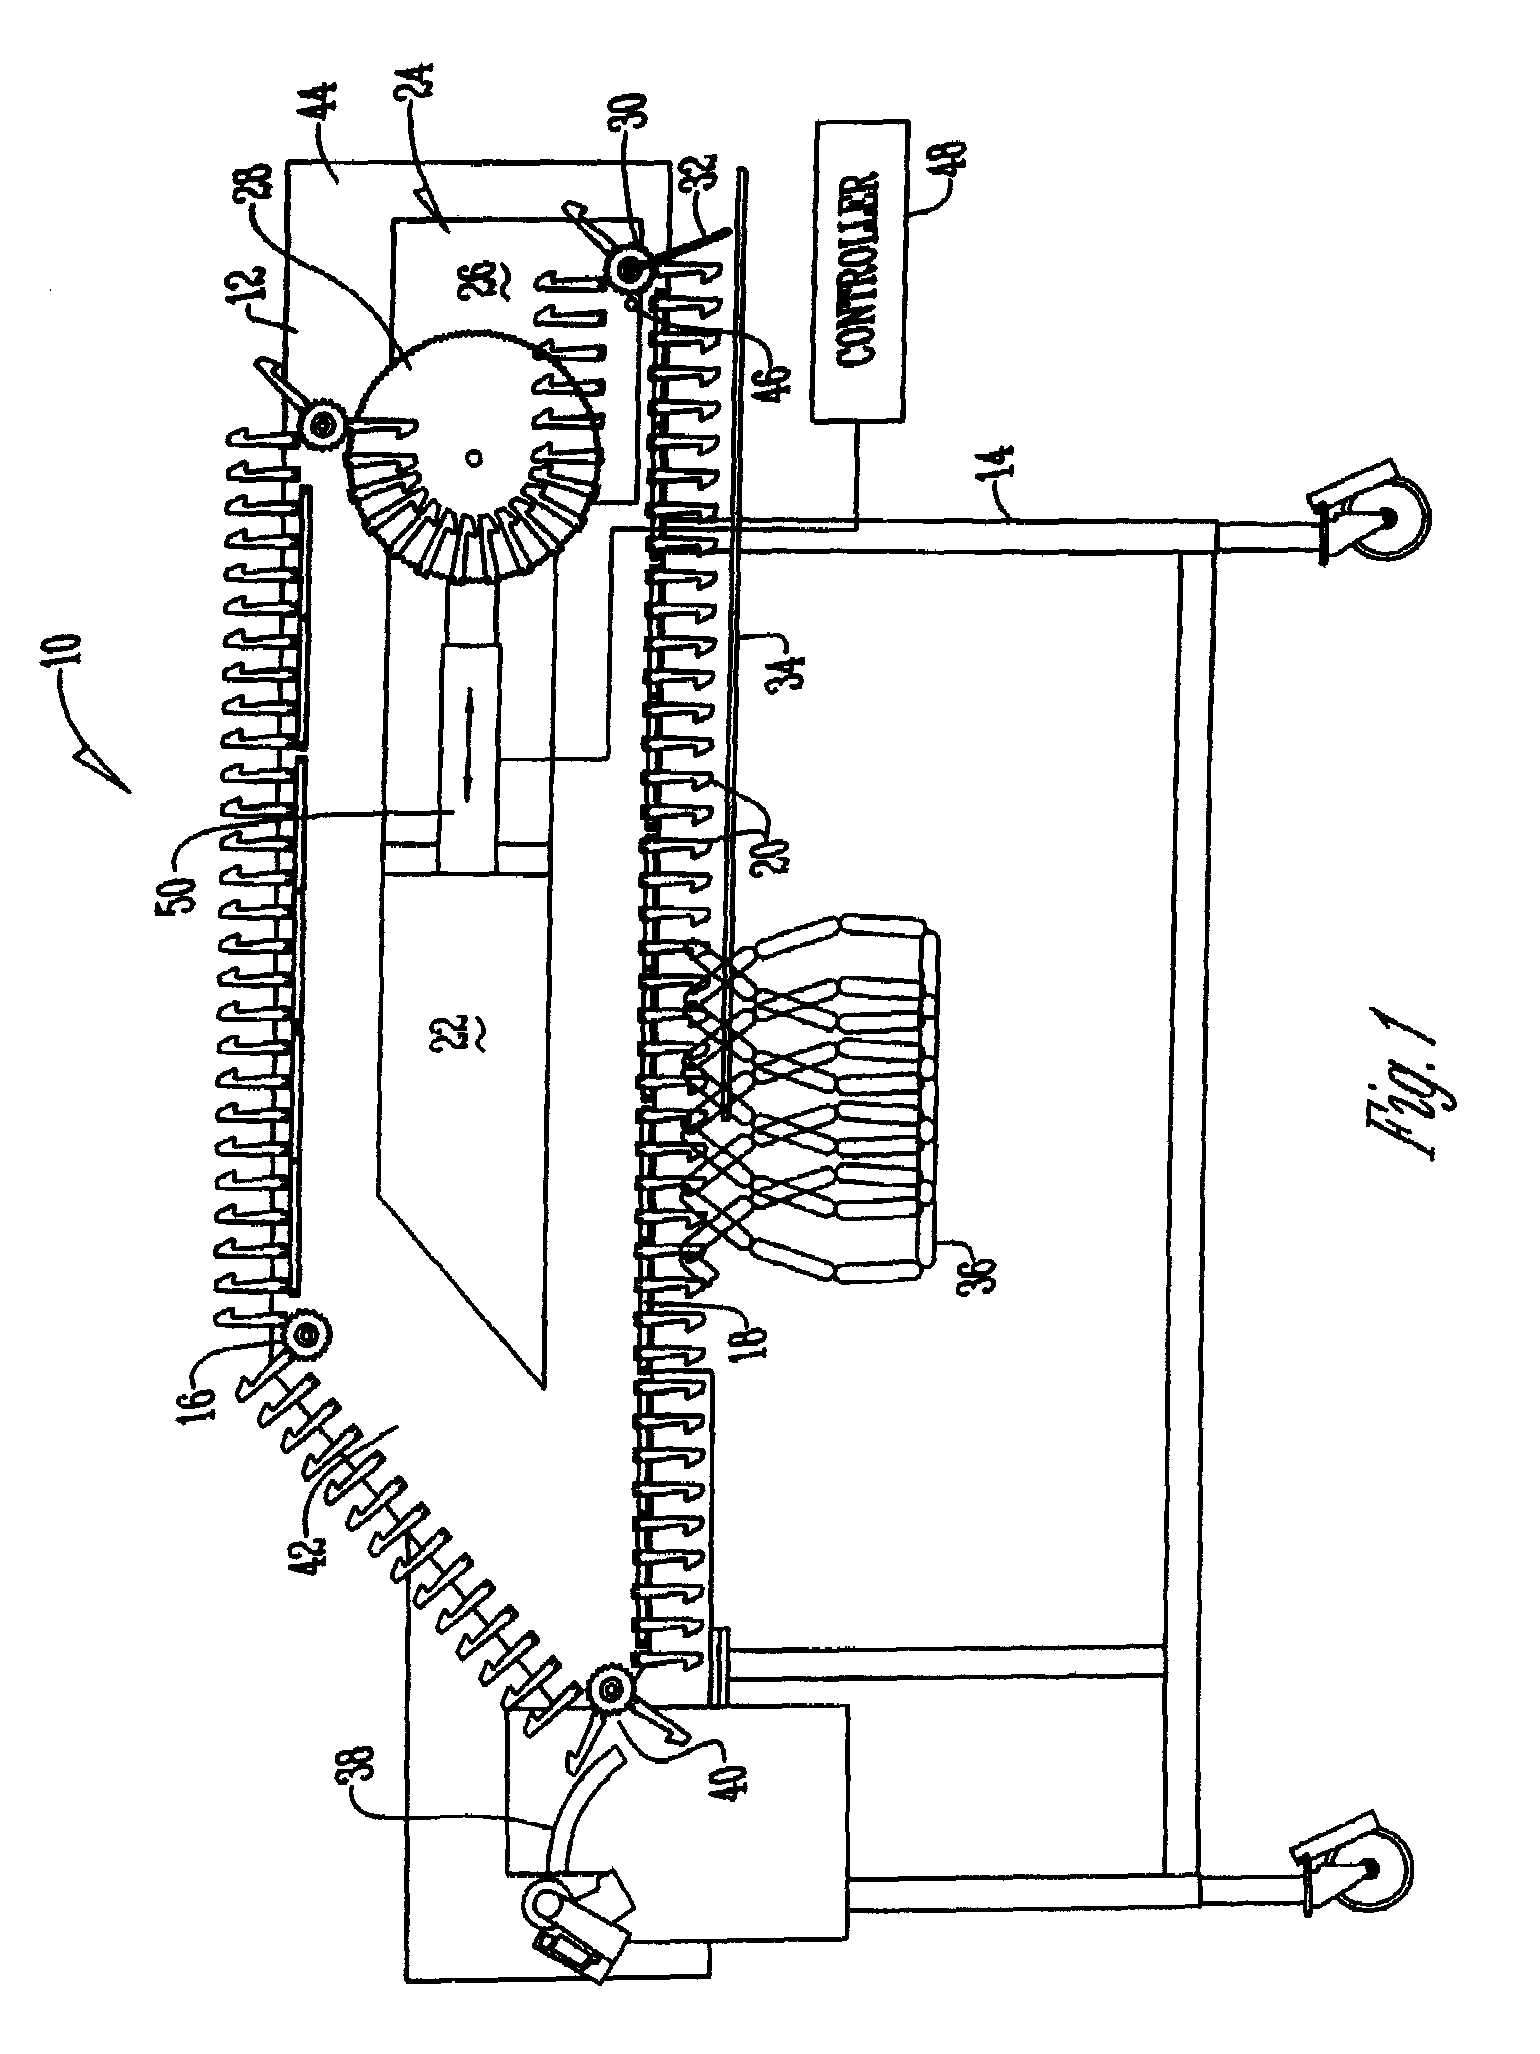 Conveyor system with moveable drop point